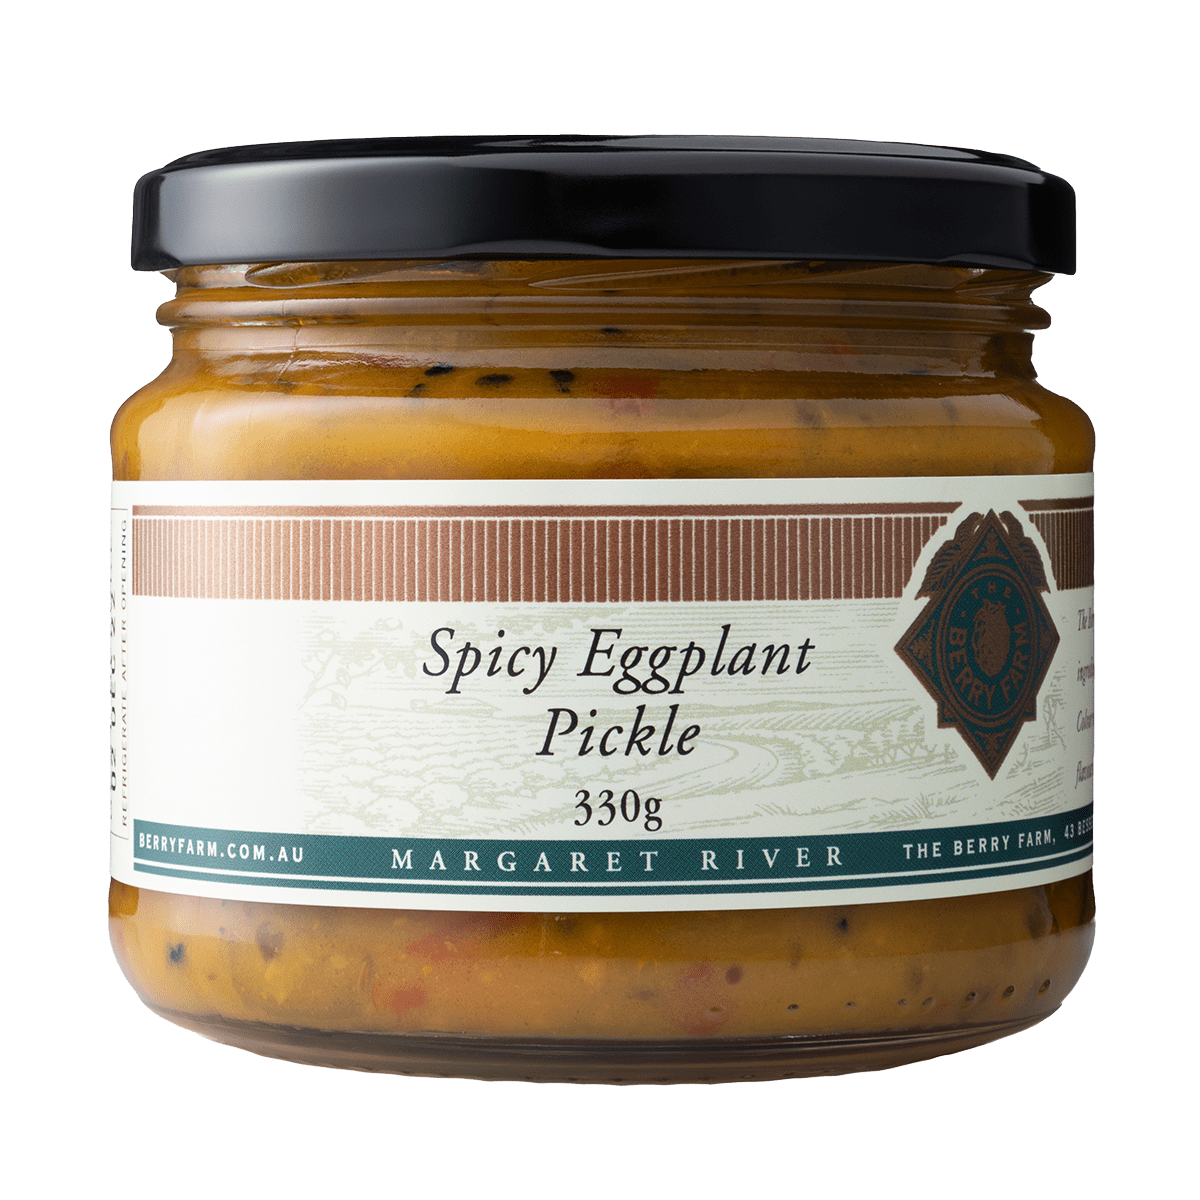 A jar of Spicy Eggplant Pickle